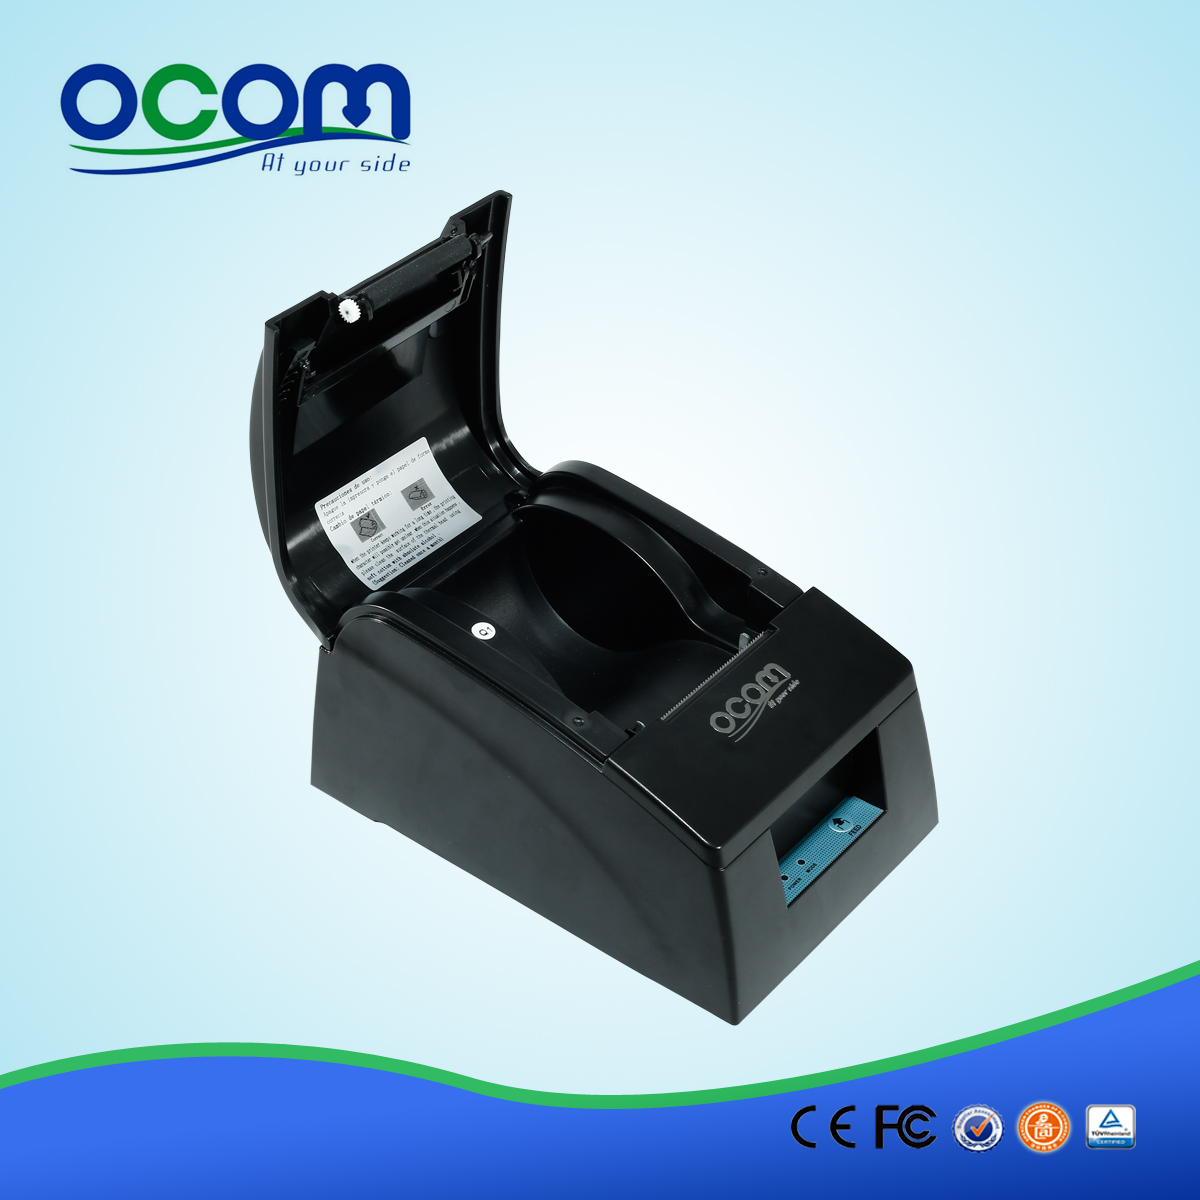 58mm android Thermobond printer-- OCPP-586